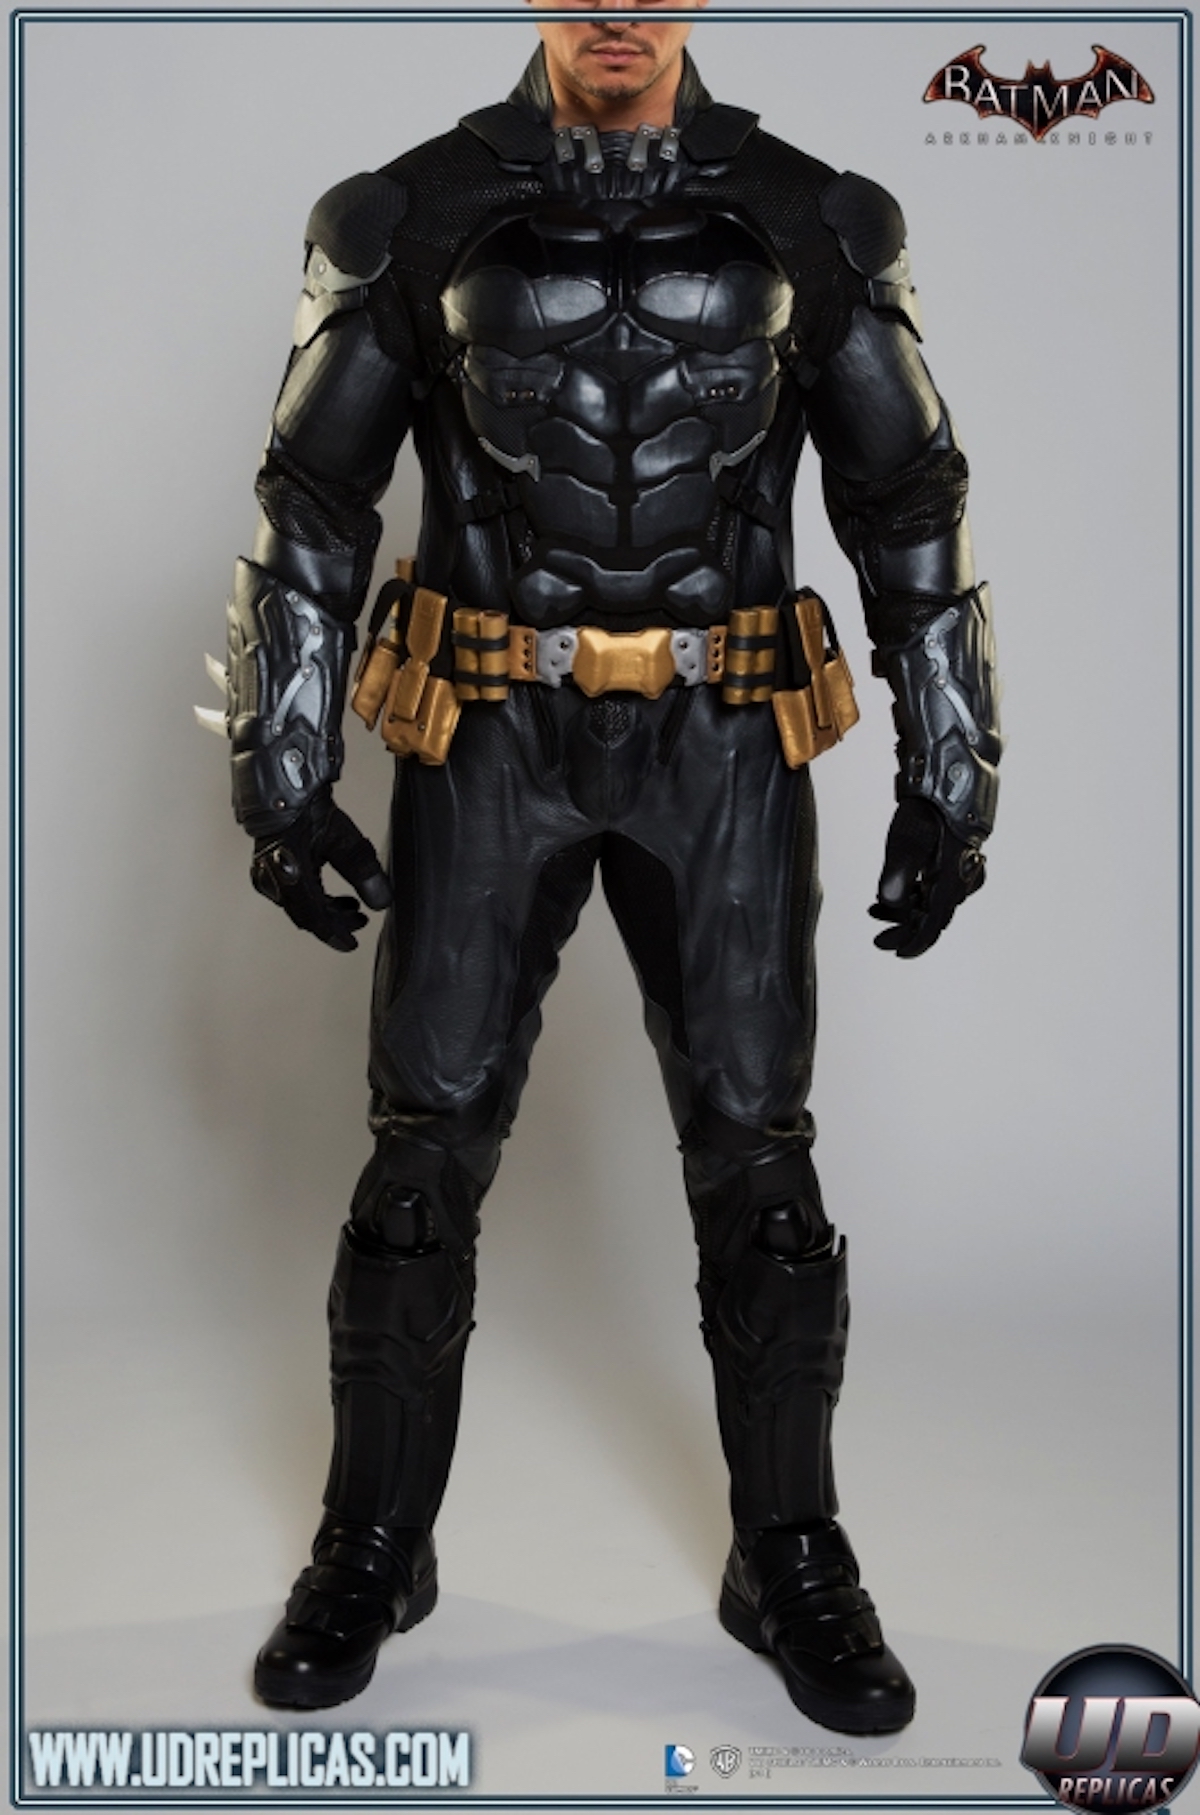 A frontal view of the BATMAN™: Arkham Knight Leather Motorcycle Suit from UD Replicas